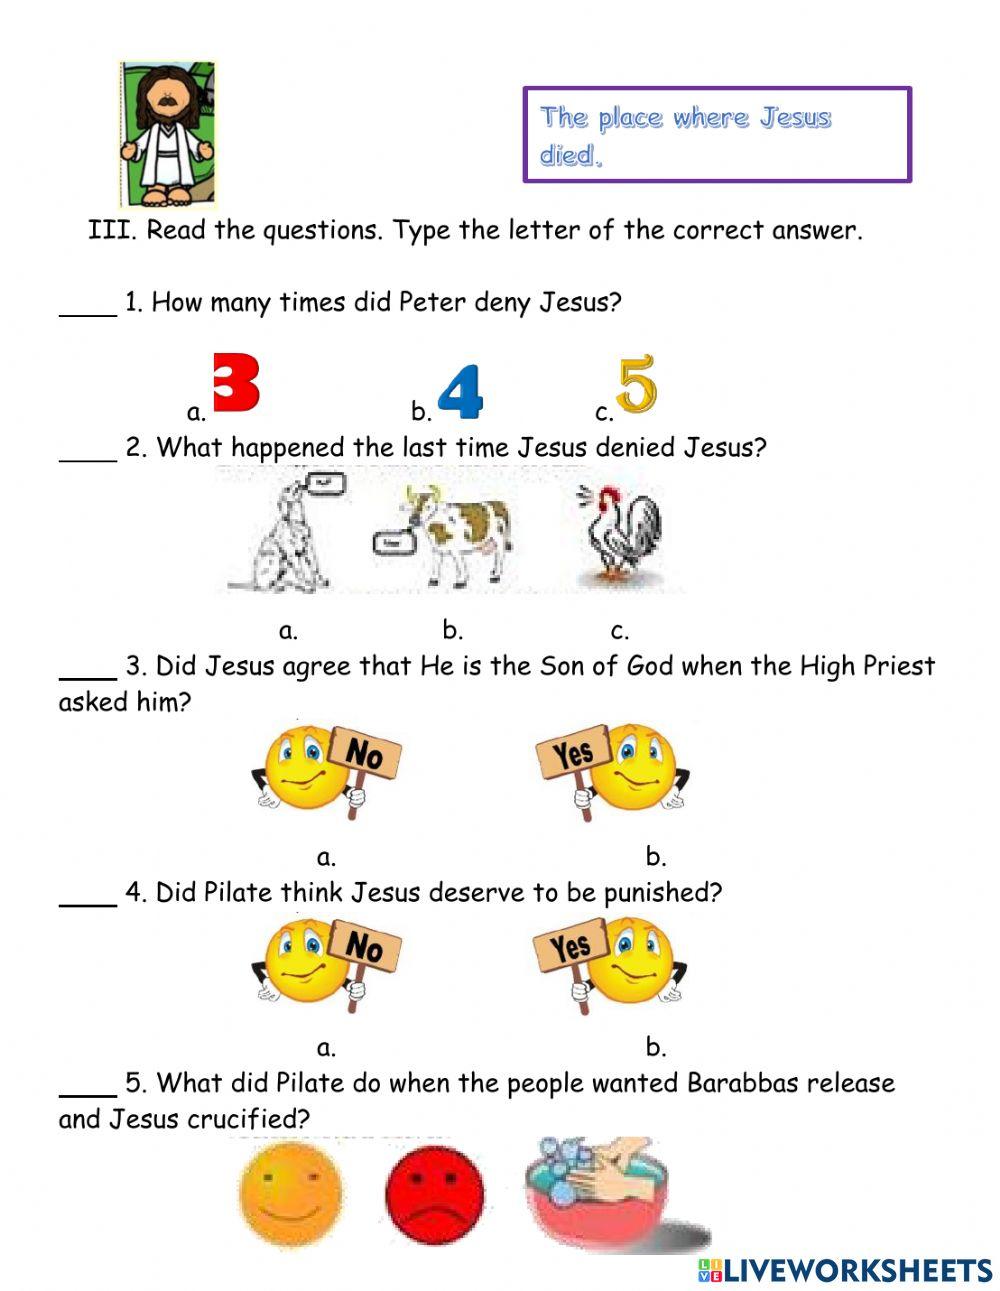 ESP-CL (KINDER) - QUIZ LESSON 5: YOUR HAND WANTS TO TELL A STORY - PART 2